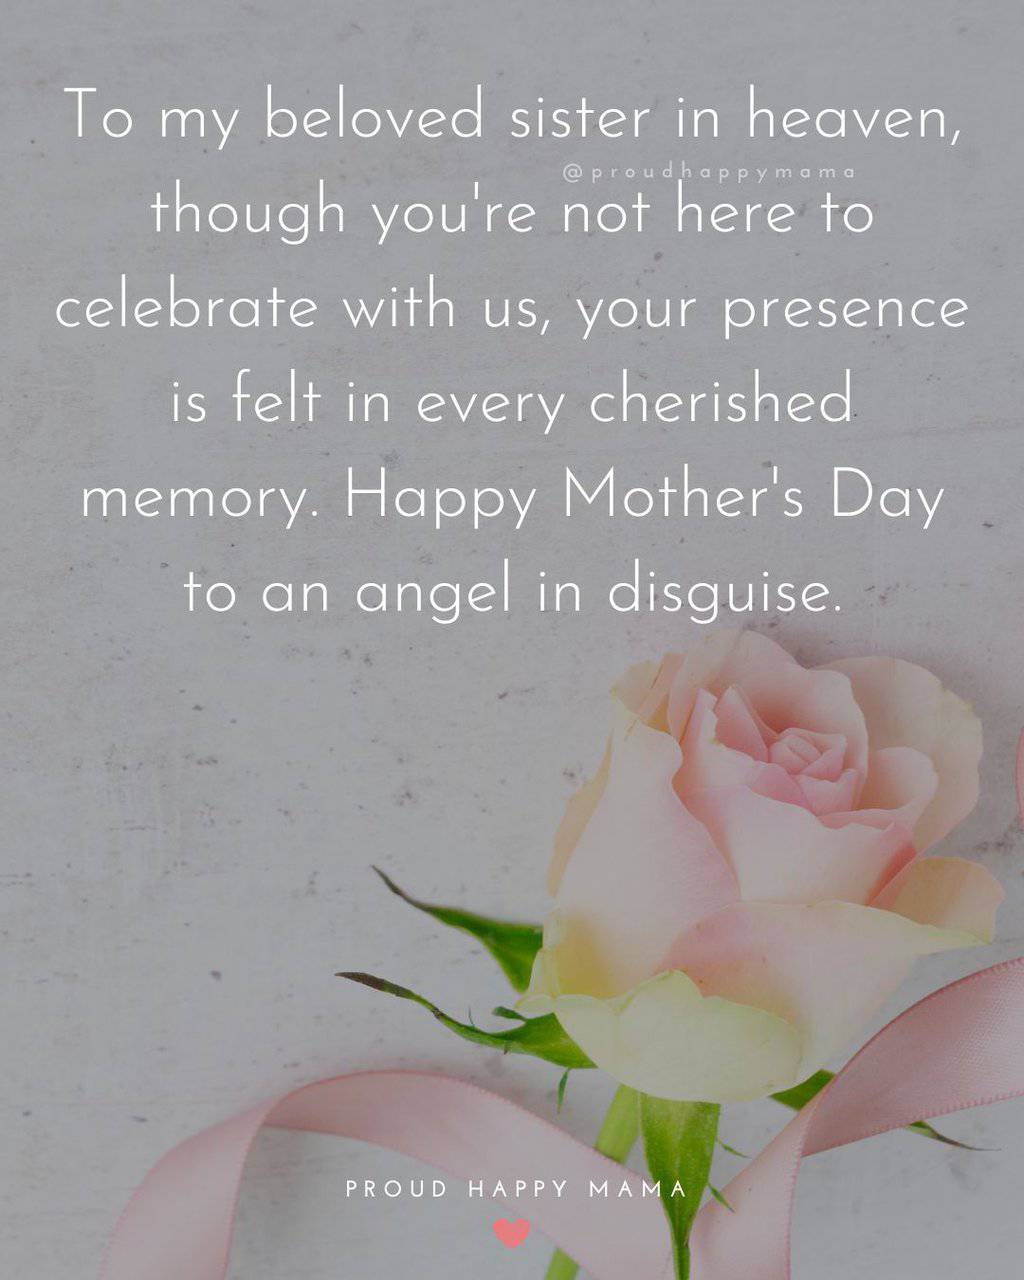 Mother's Day Quotes For Sister In Heaven